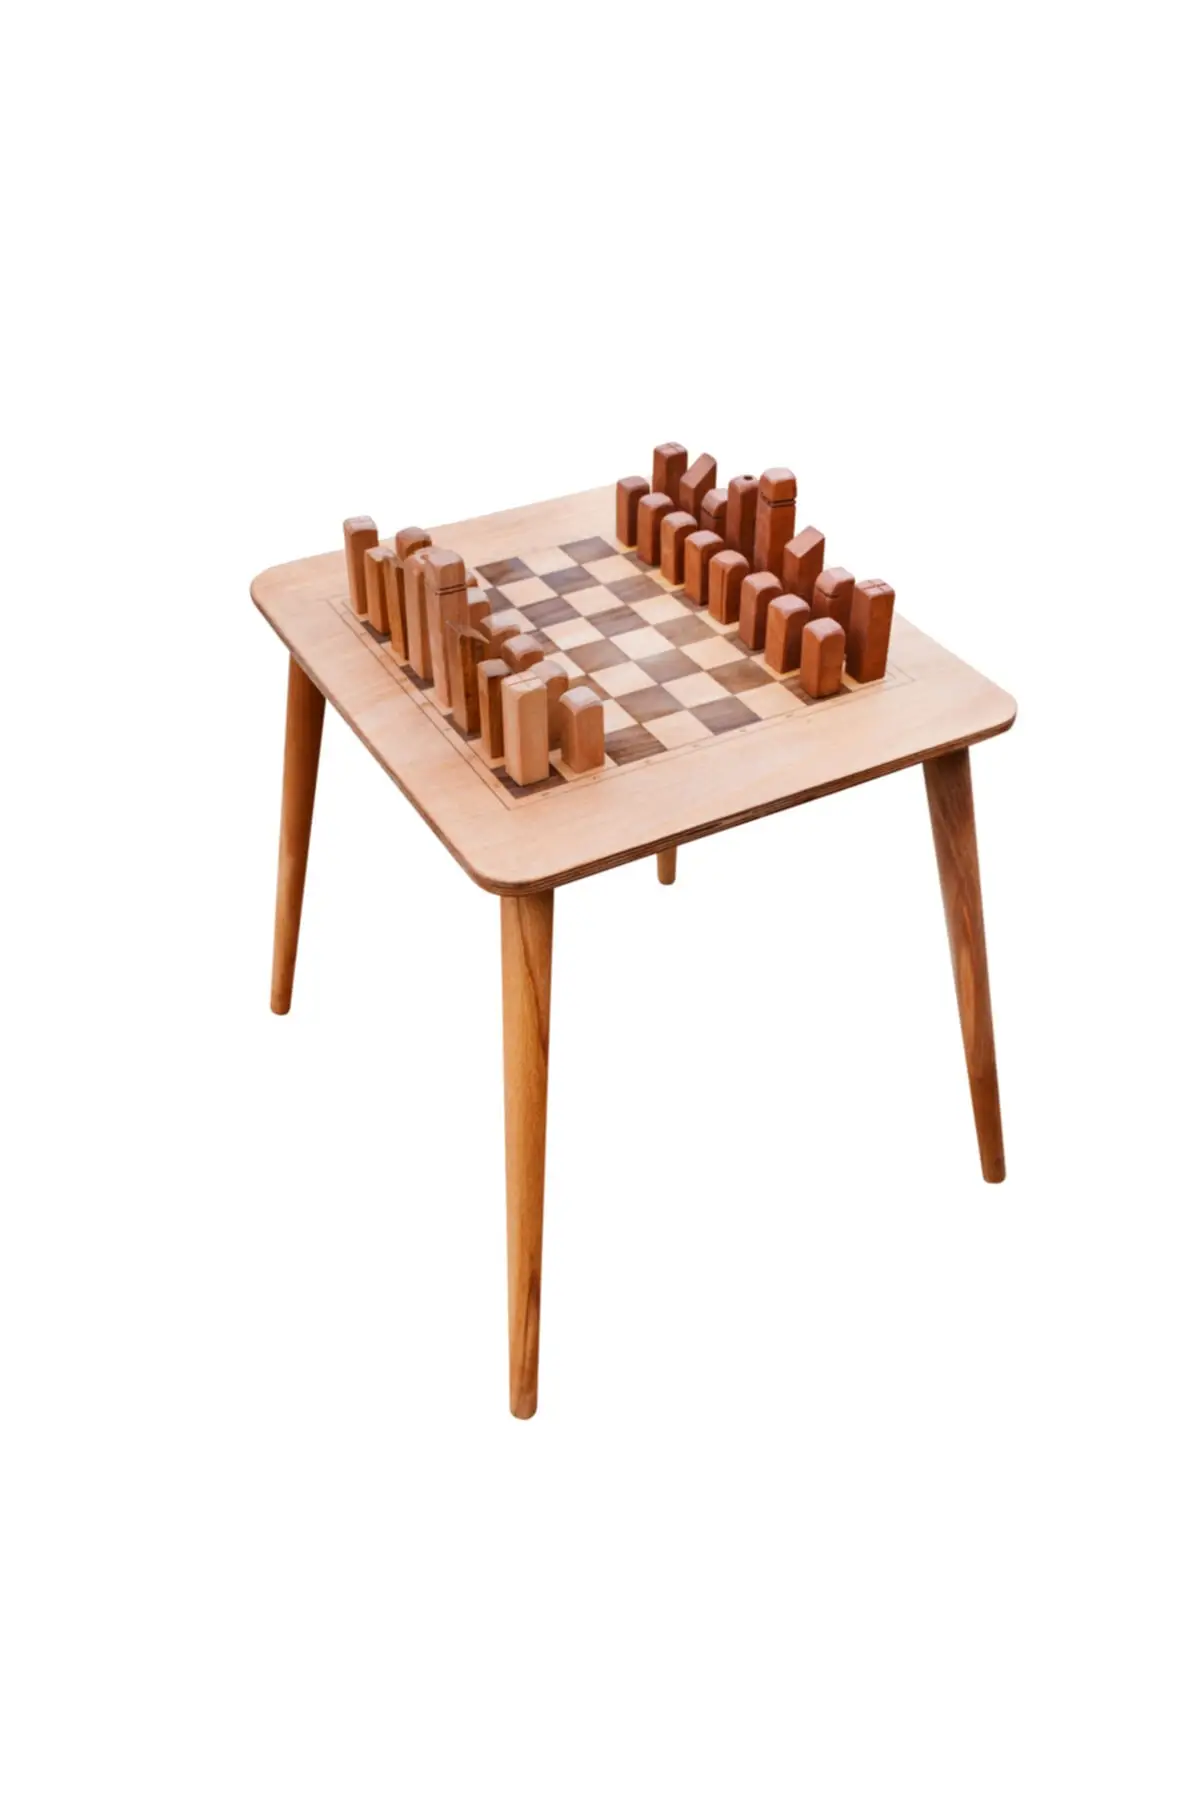 Wooden Laser Pattern Custom Design Chess Table Set Toys Painting Board Table Art Educational Entertainment Tools For Kids